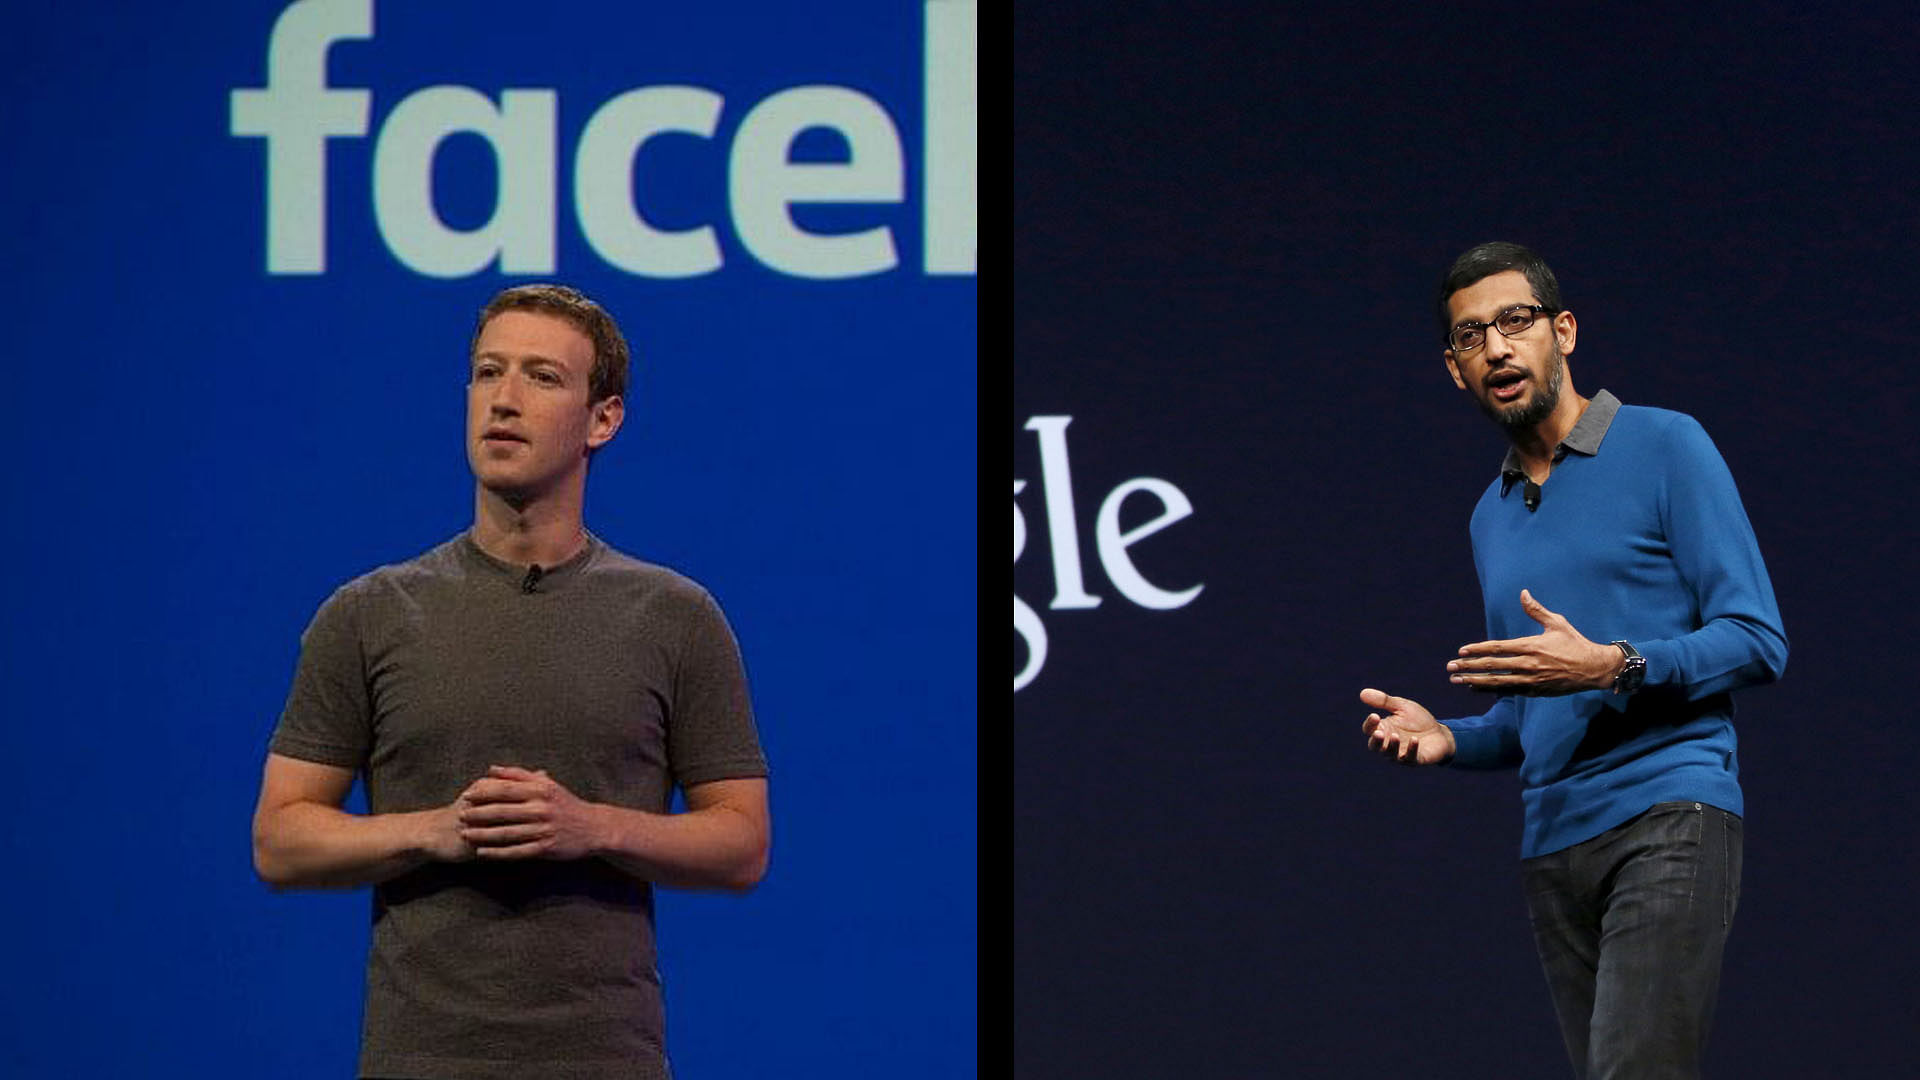 Both Facebook and Google have reported their recent revenue figures.